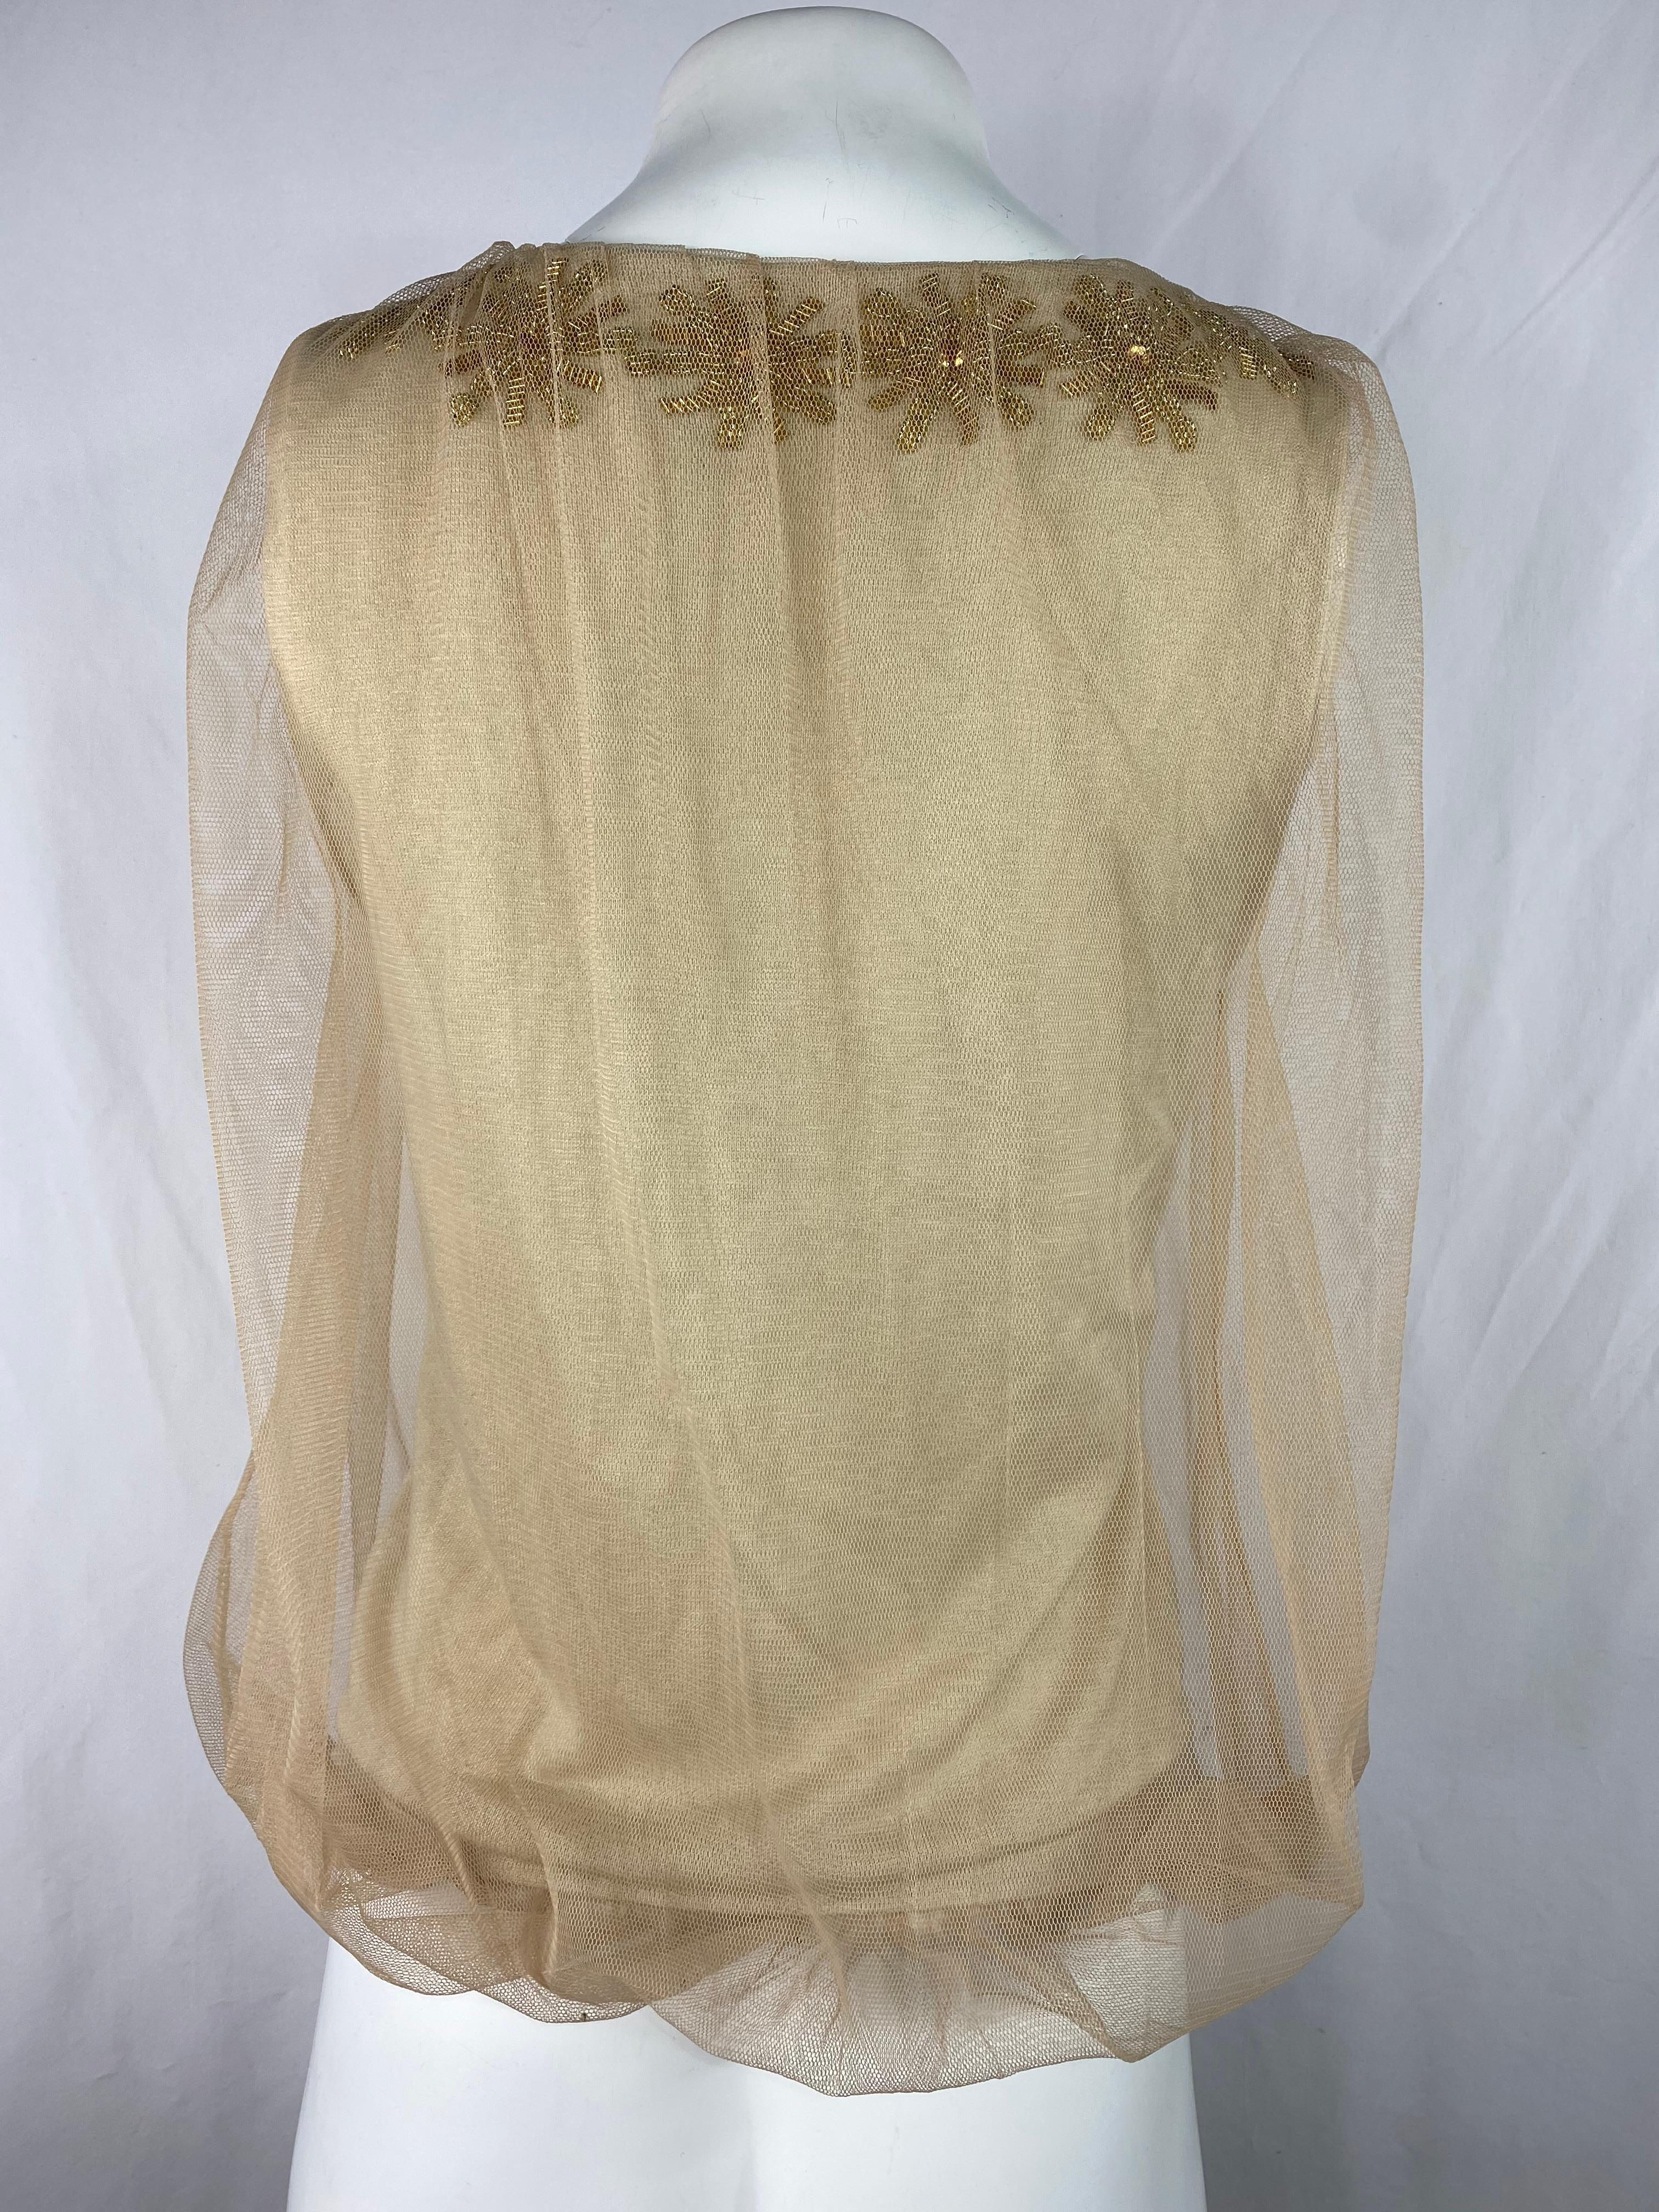 3.1 Phillip Lim Beige Knit and Tulle Vest Blouse Top, Size Small For Sale 1